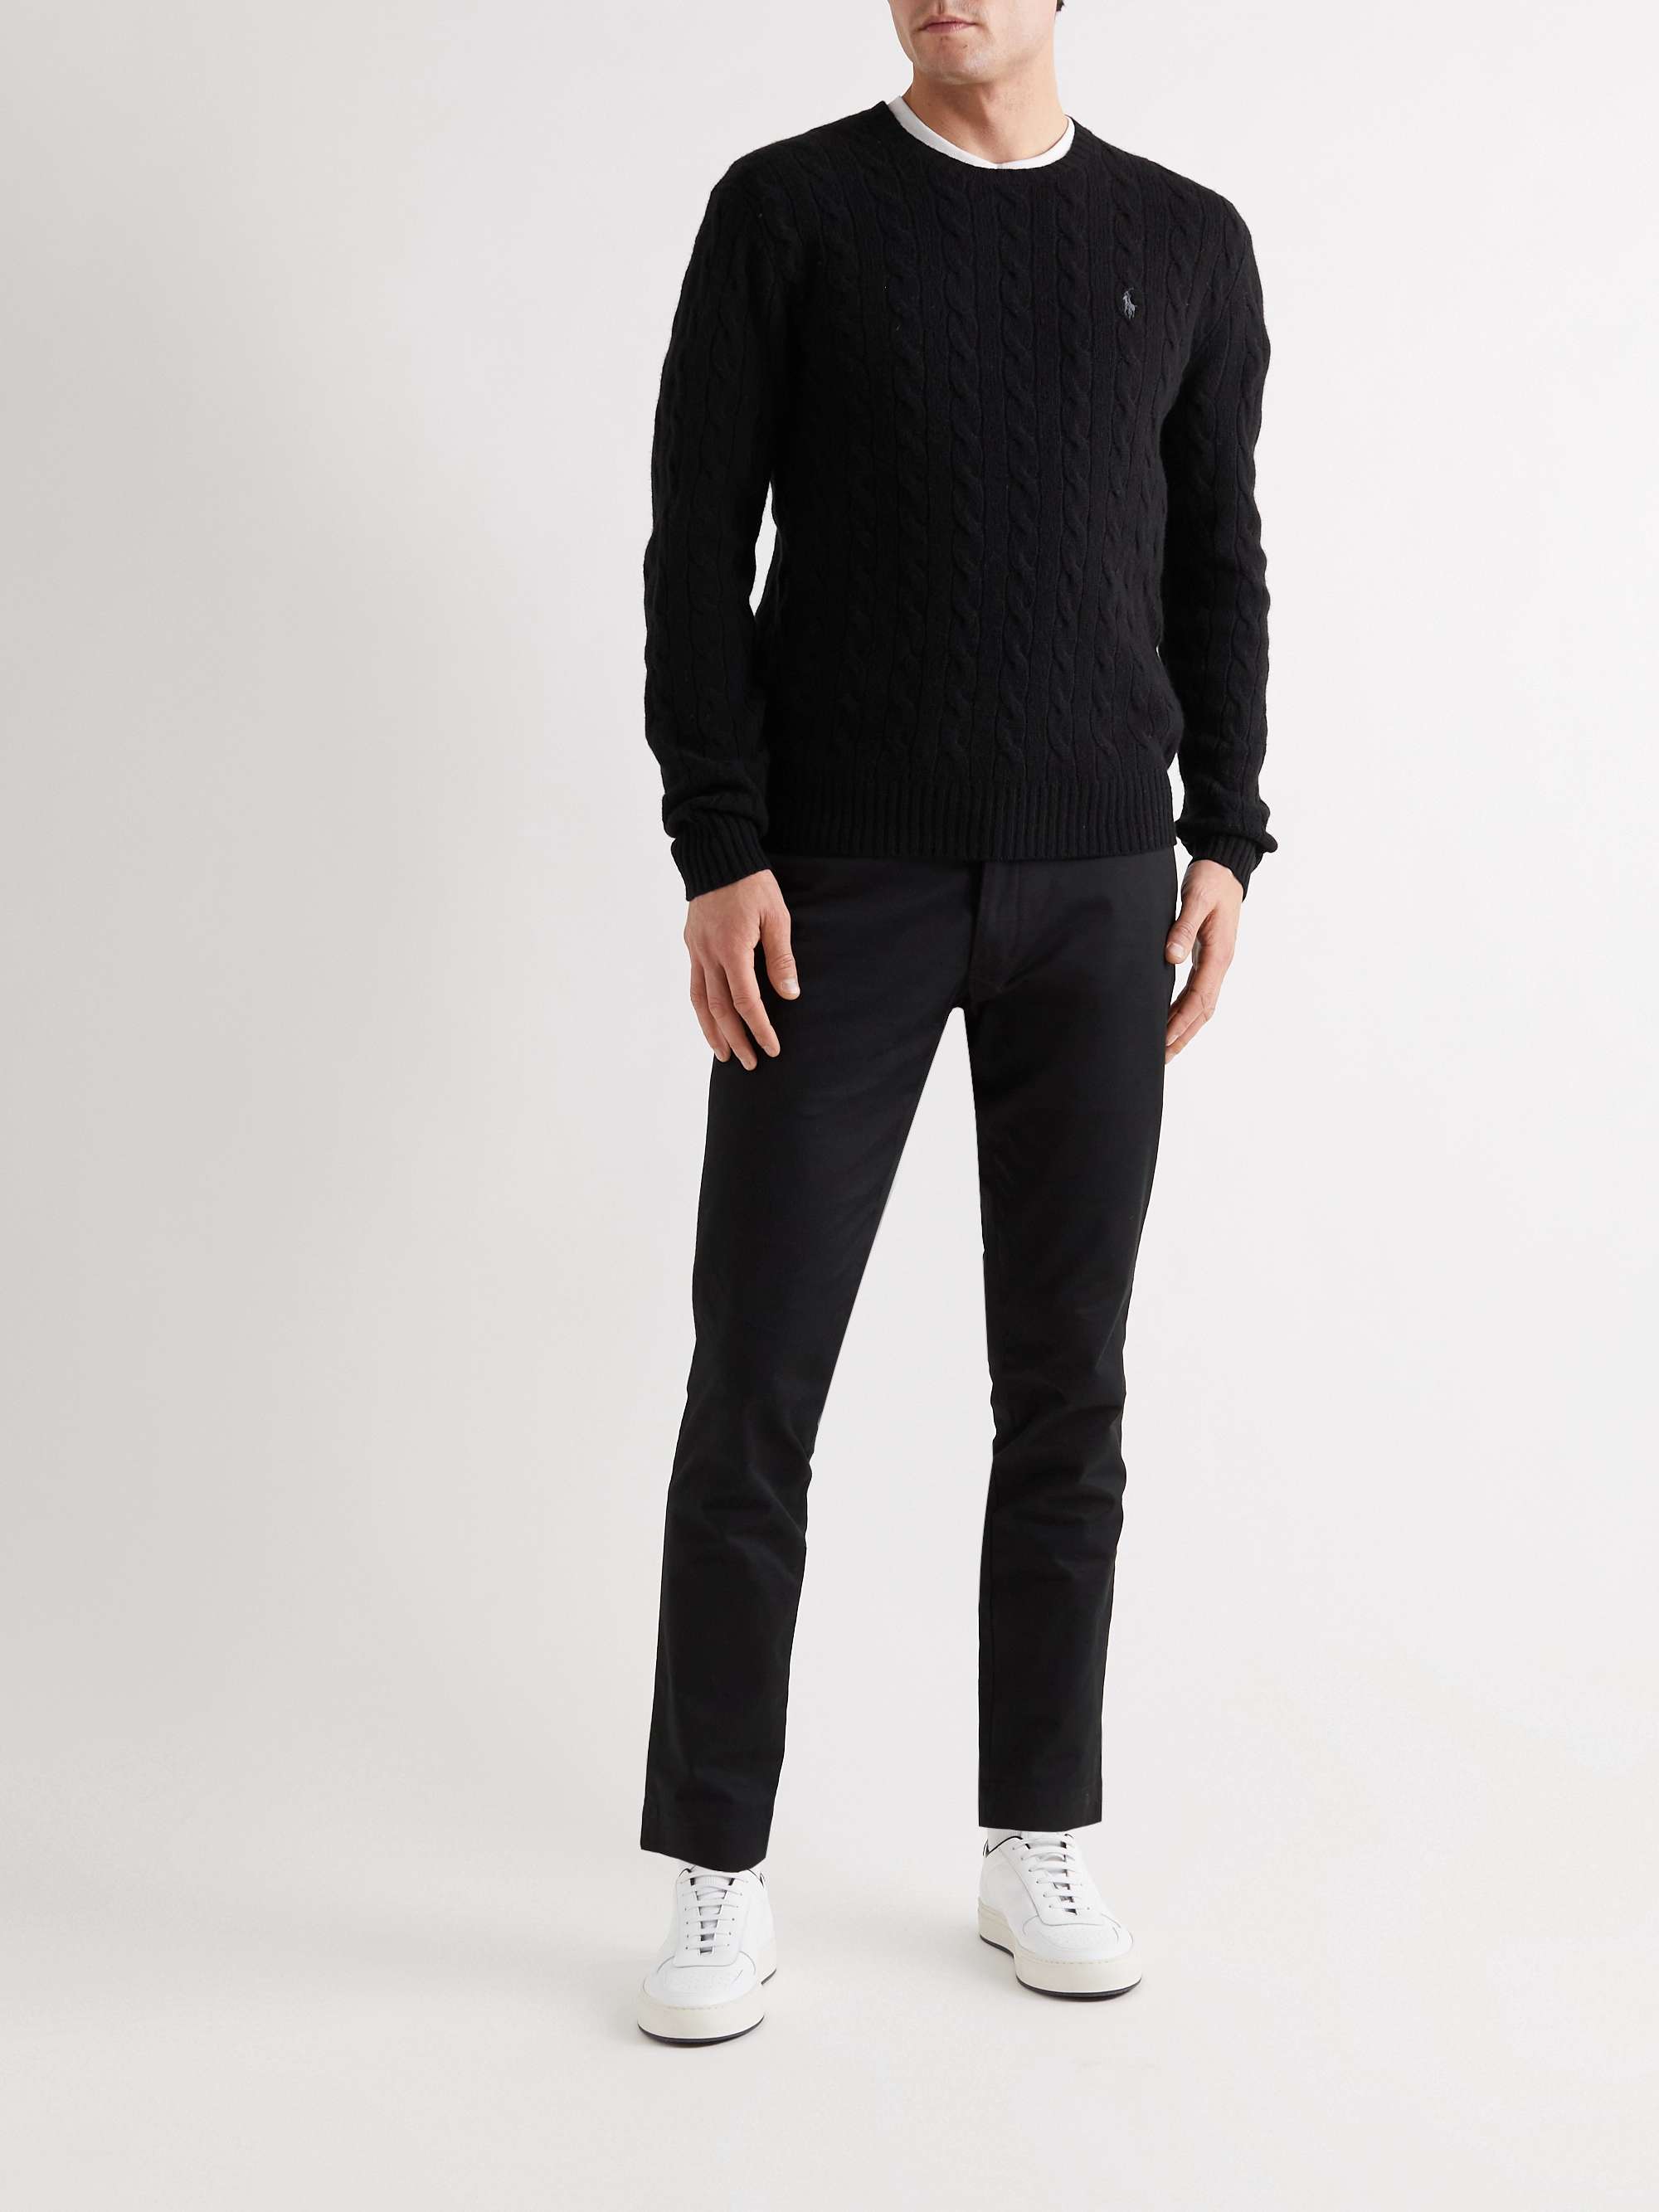 POLO RALPH LAUREN Cable-Knit Merino Wool and Cashmere-Blend Sweater